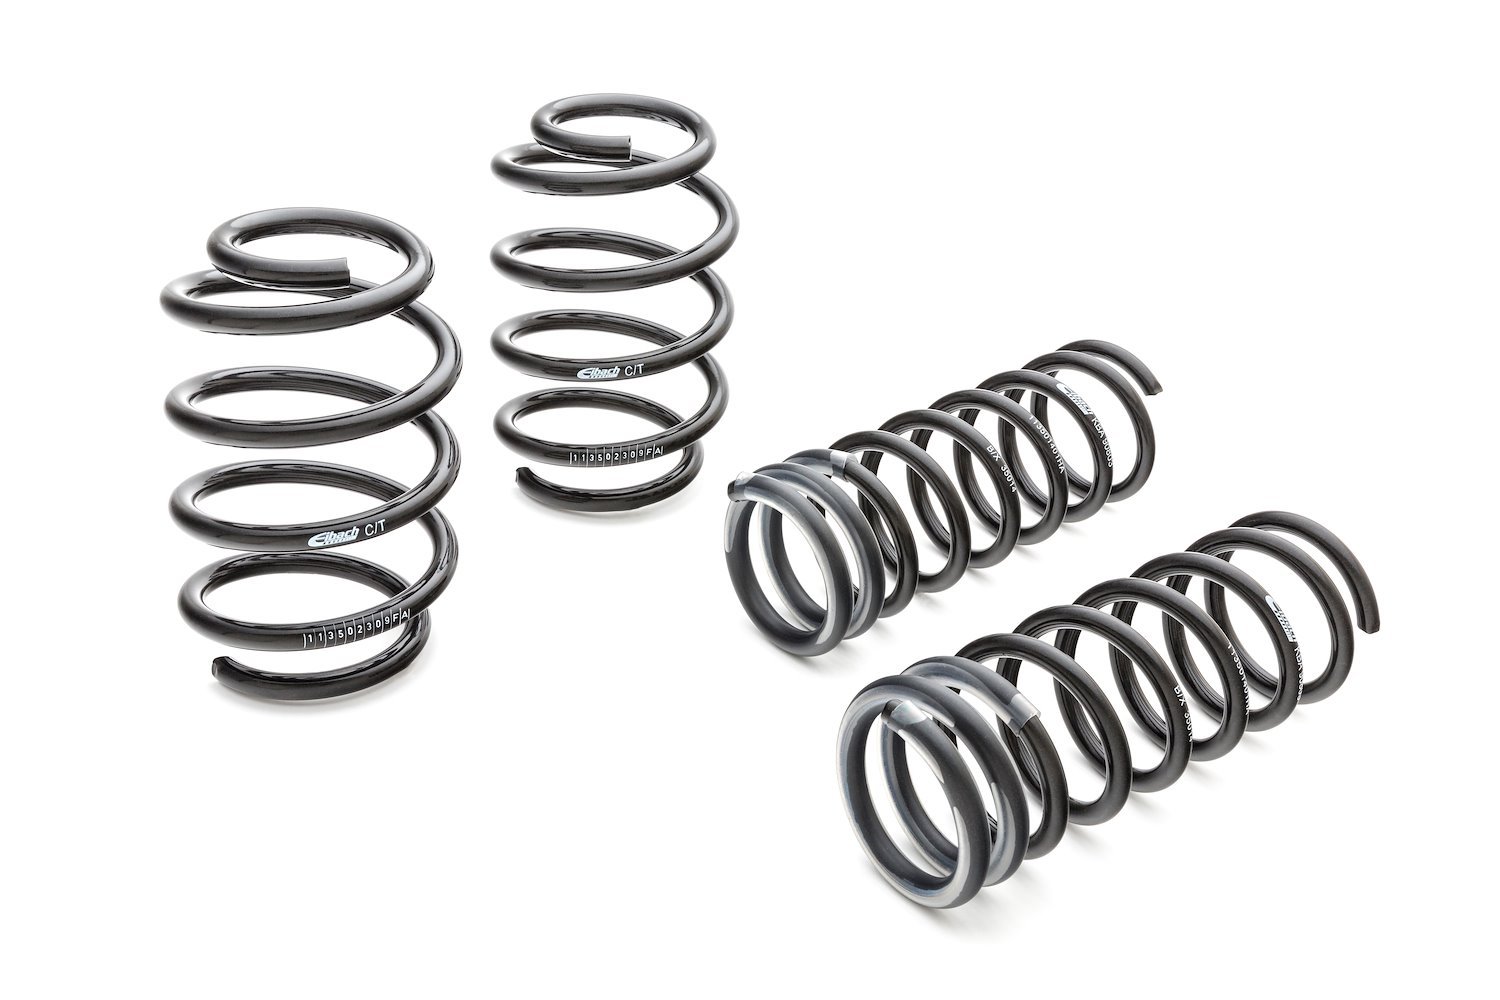 6388.140 Pro-Kit Lowering Springs 2008-2013 for Infiniti G37 Coupe - 1.200 in. Front/.800 in. Rear Drop